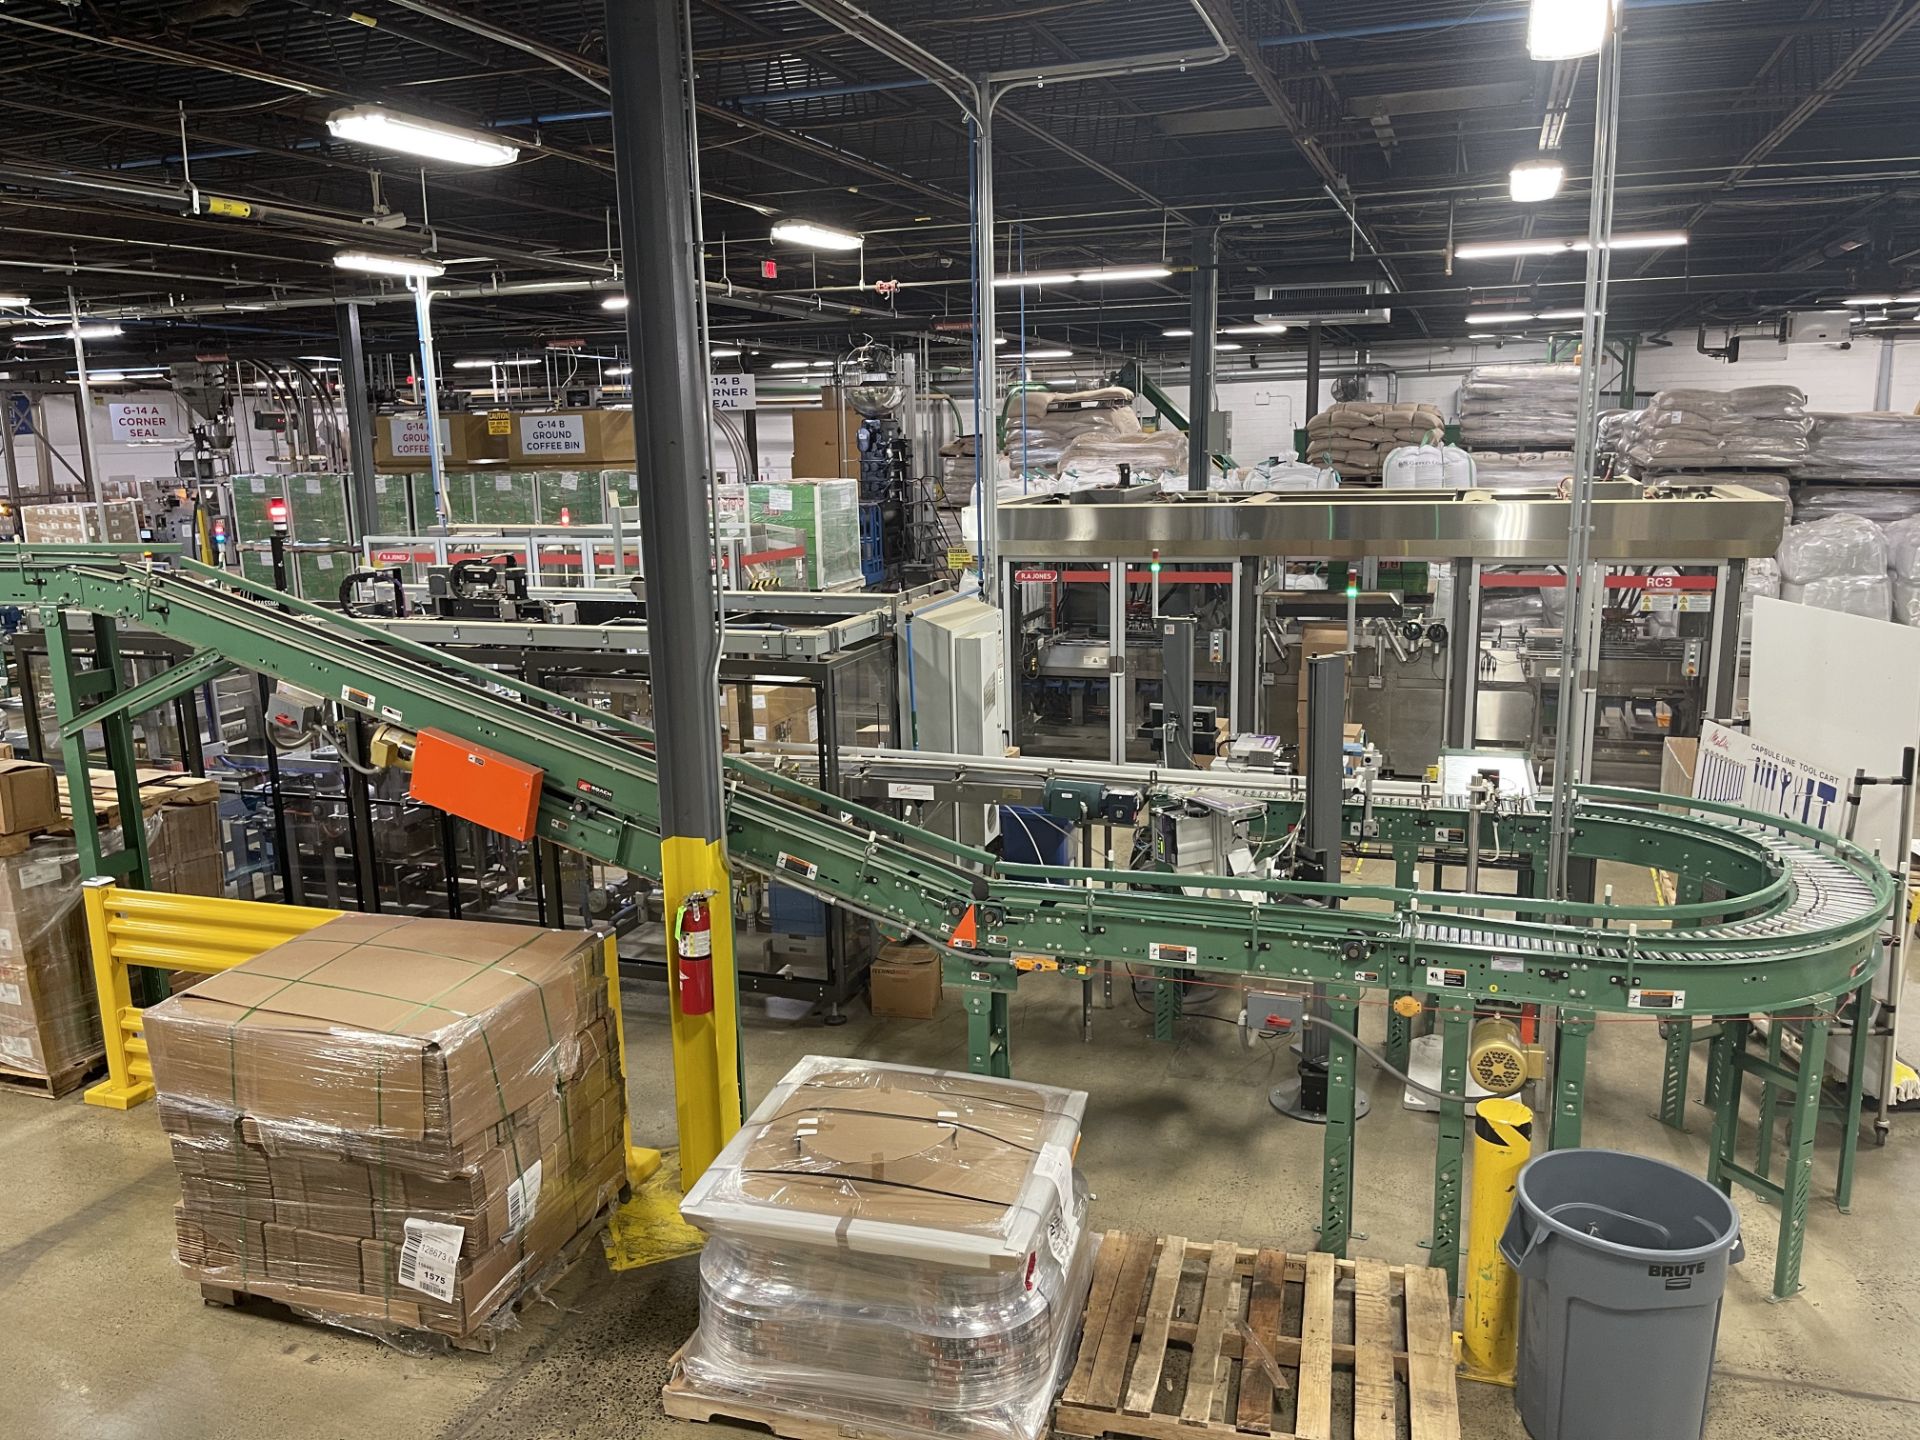 CASE CONVEYOR SYSTEMS ON PRODUCTION LINE (2019 MFG) - Image 2 of 3